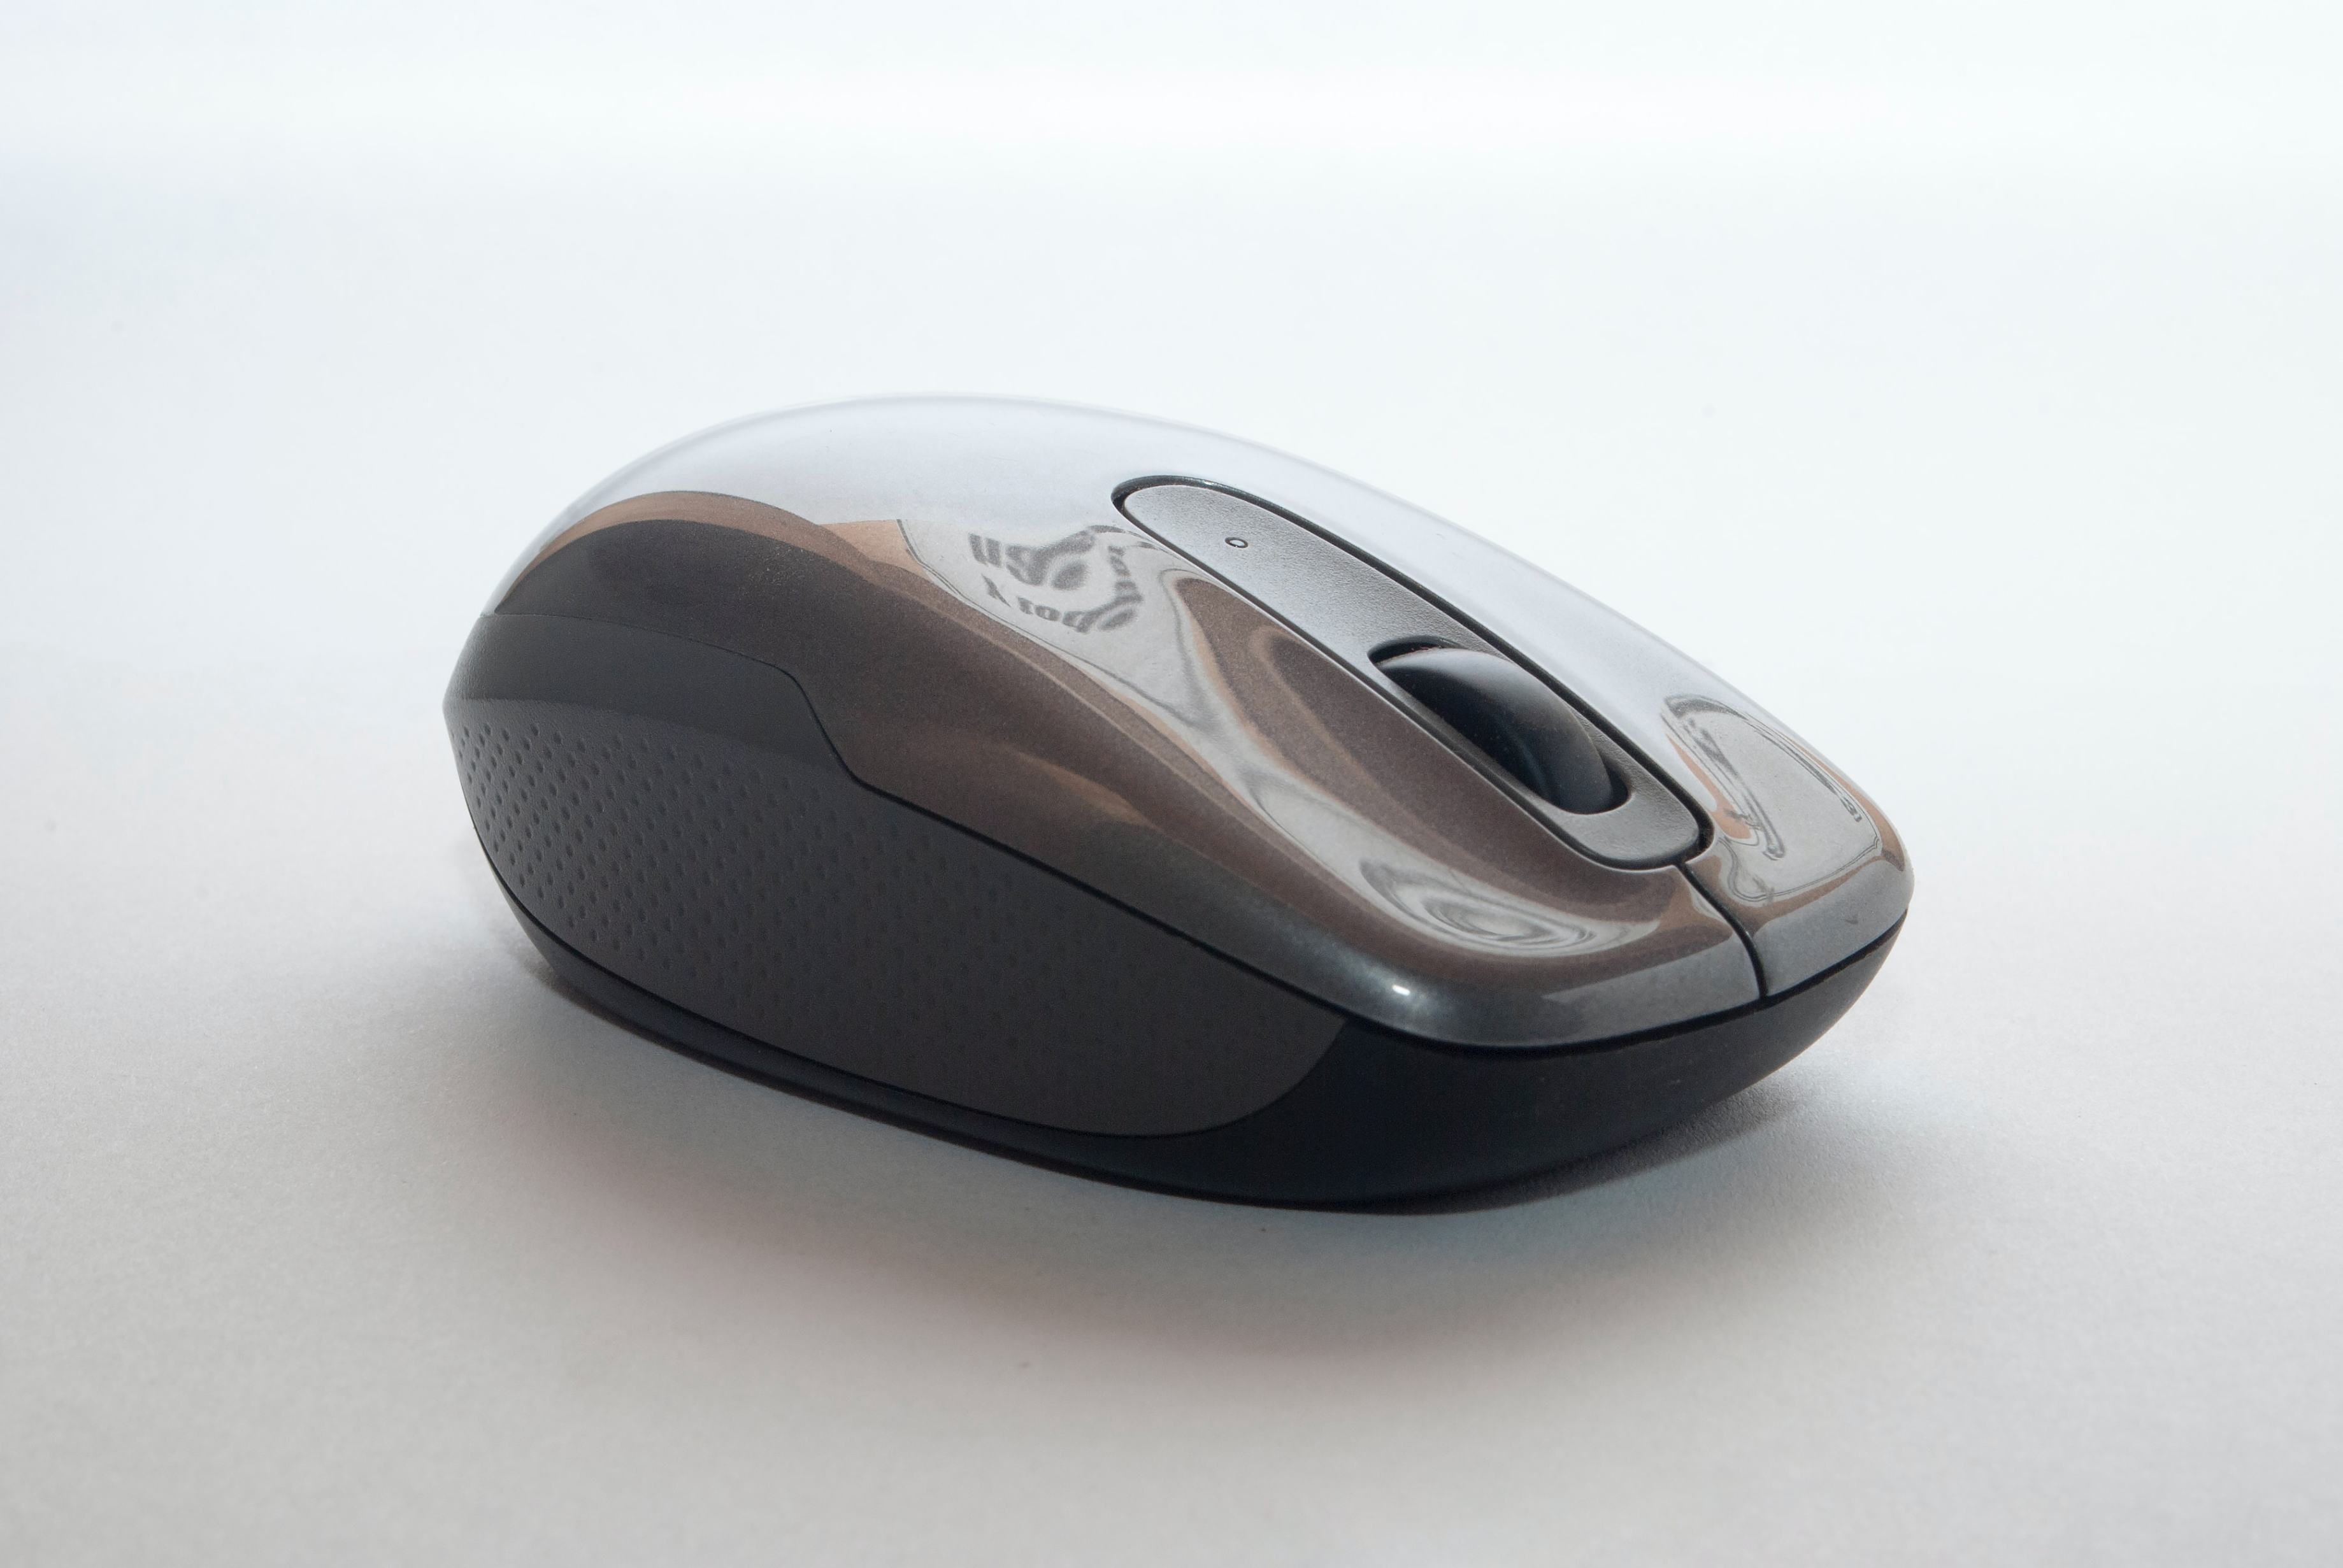 wireless mouse printing